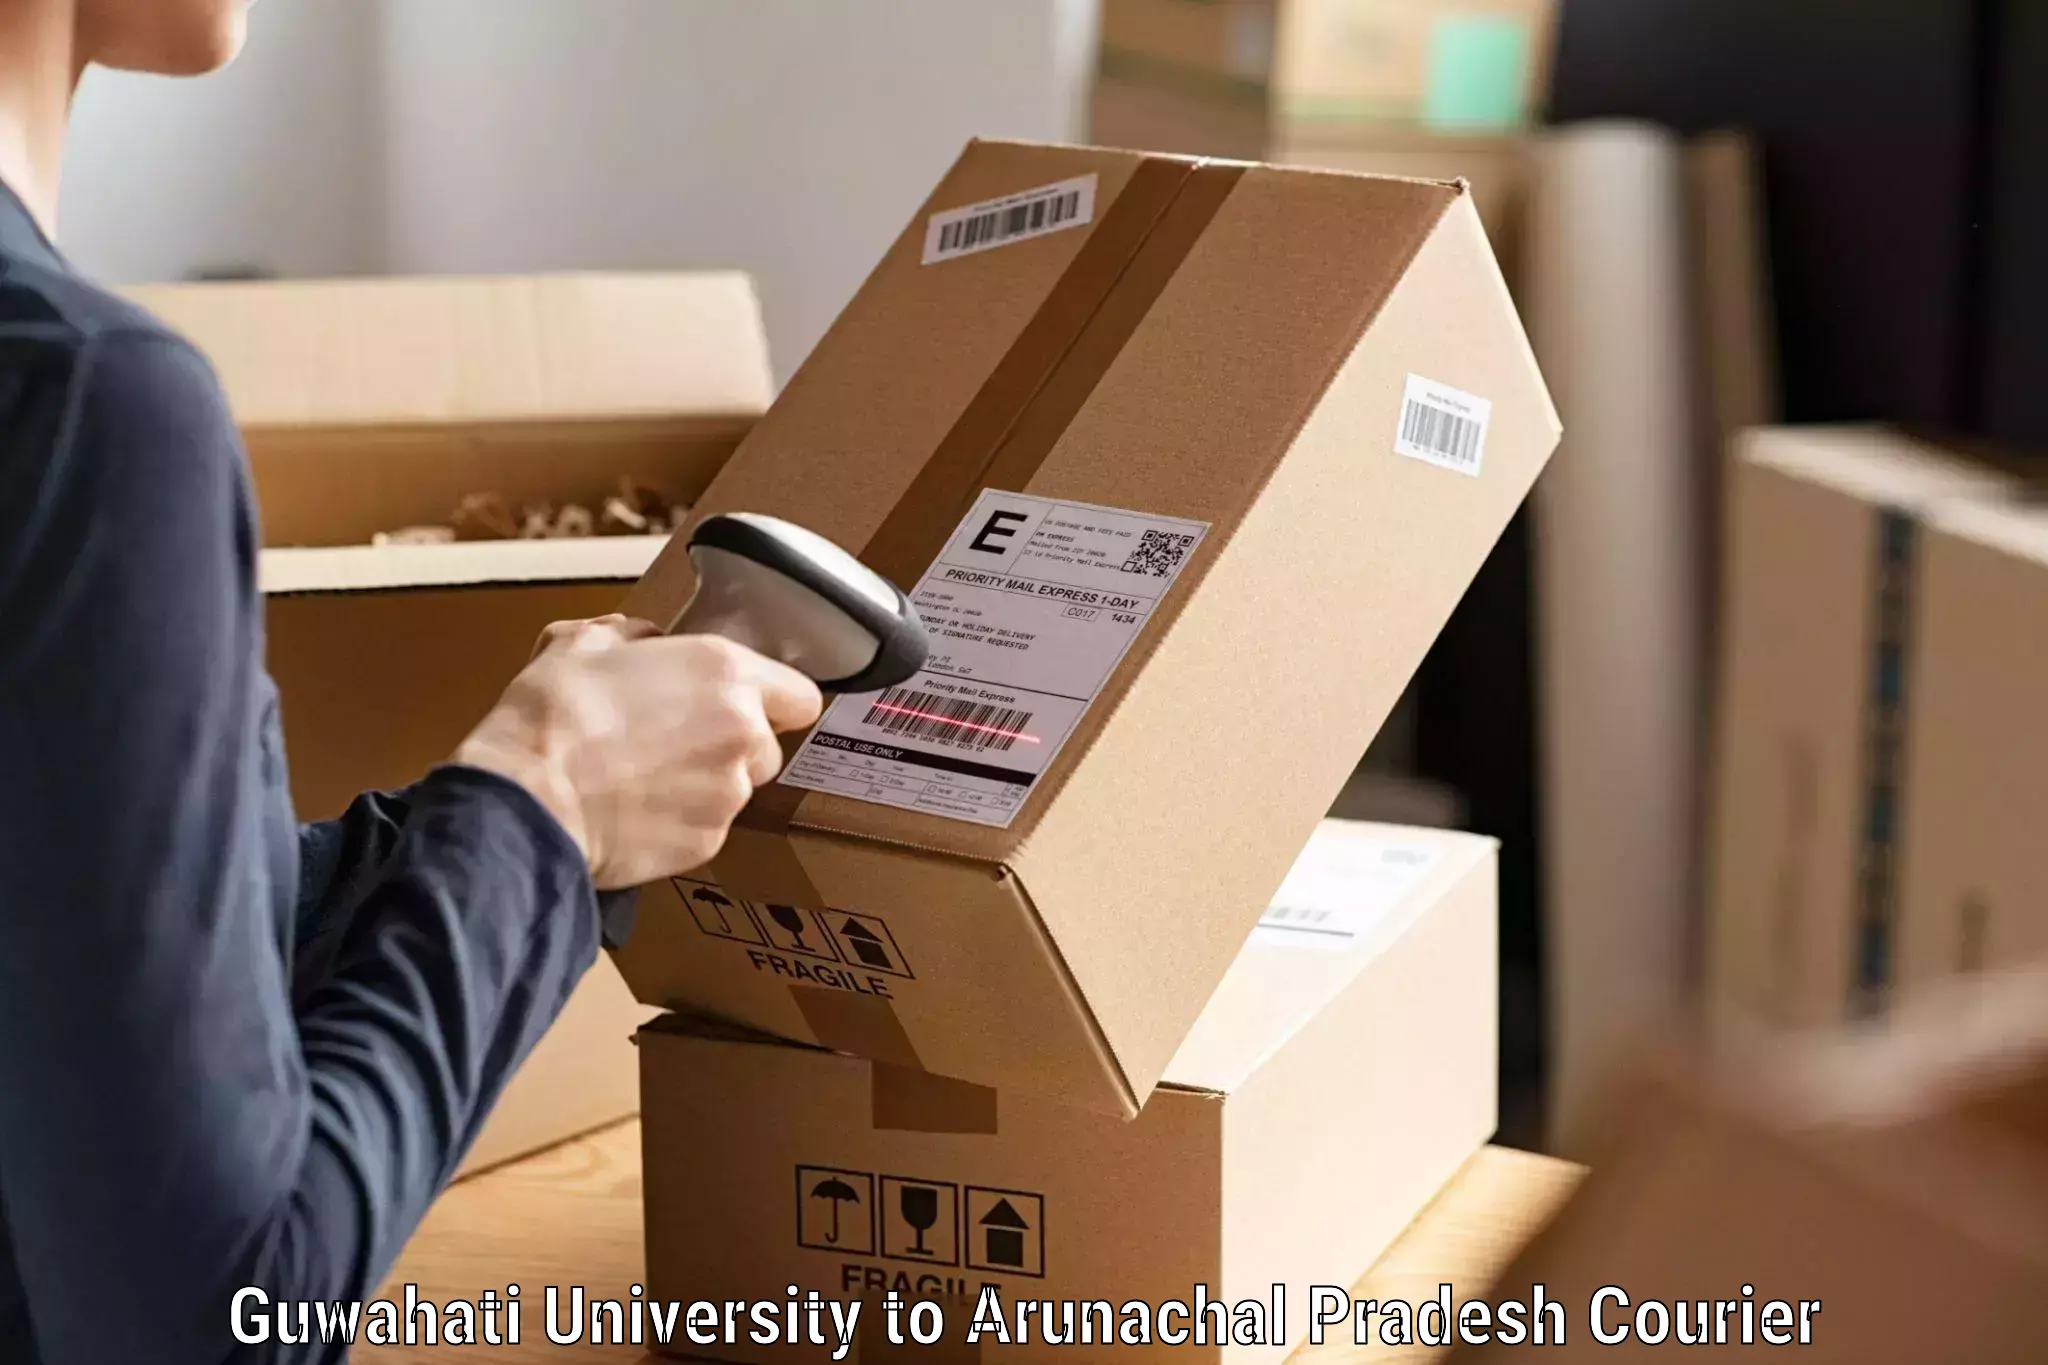 Cost-effective courier options Guwahati University to Deomali